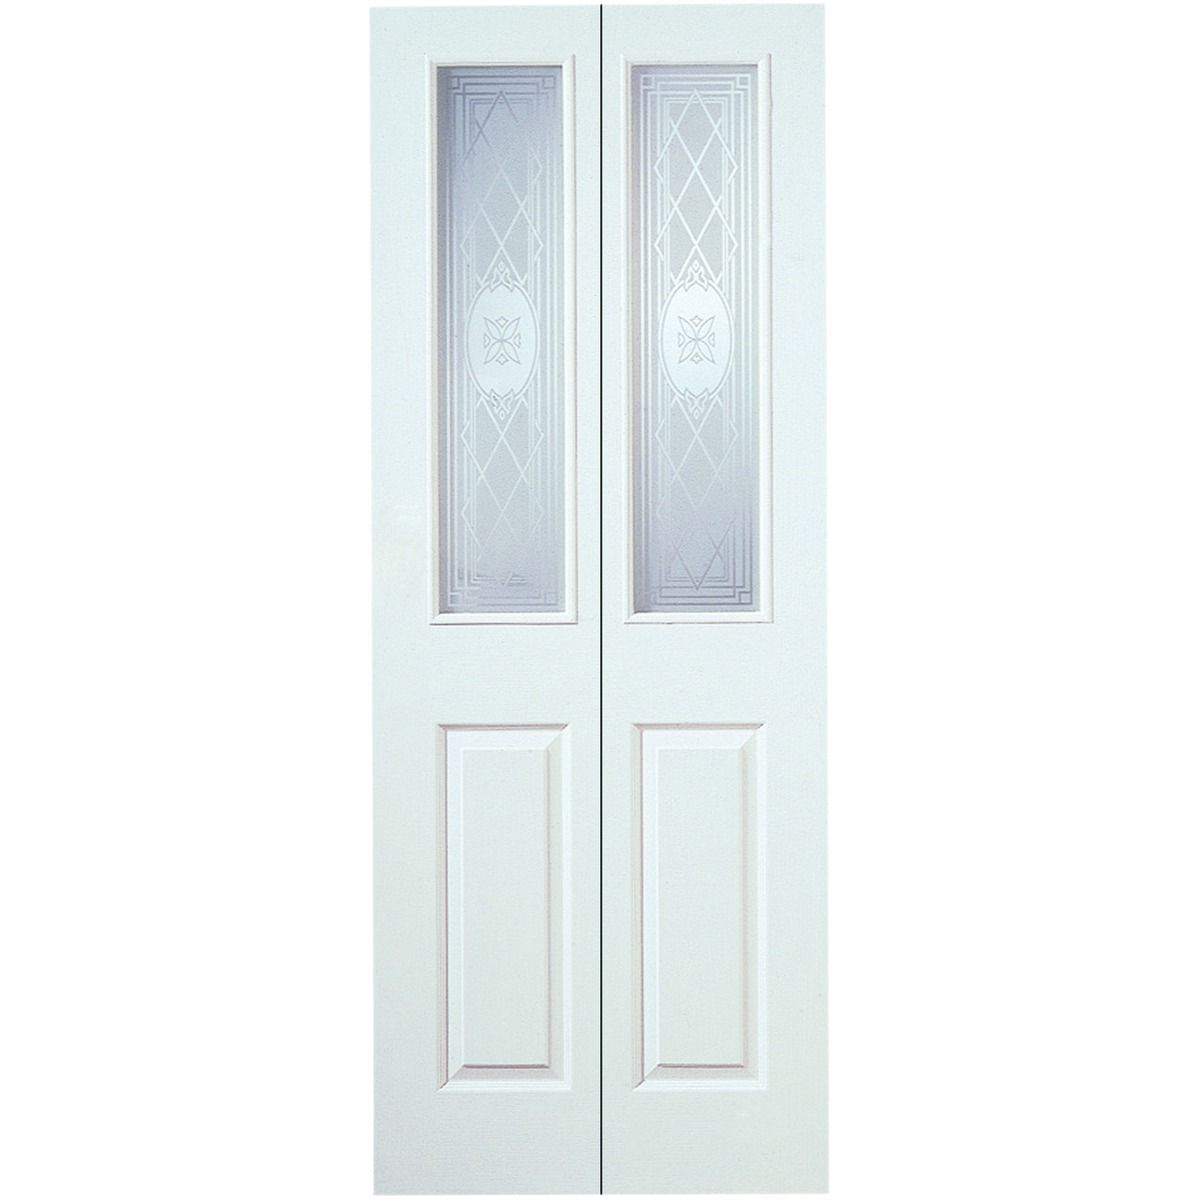 Image of Wickes Chester White Glazed Grained Moulded 4 Panel Internal Bi-Fold Door - 1981 x 762mm